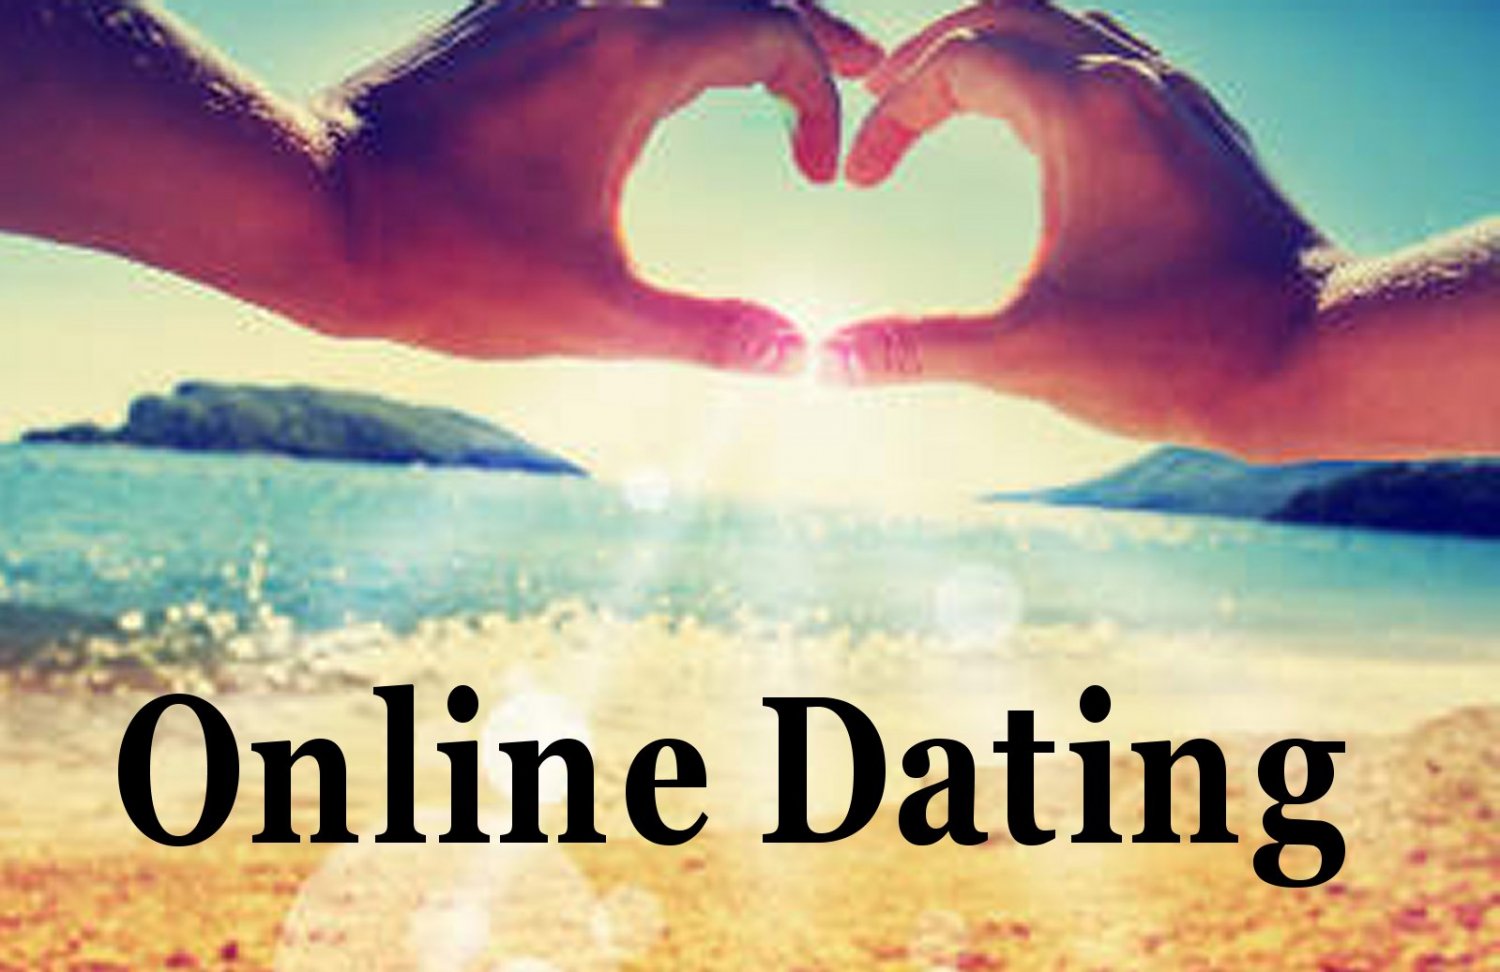 6 Online Dating Tips for Guys That Actually Work - Reality Crazy